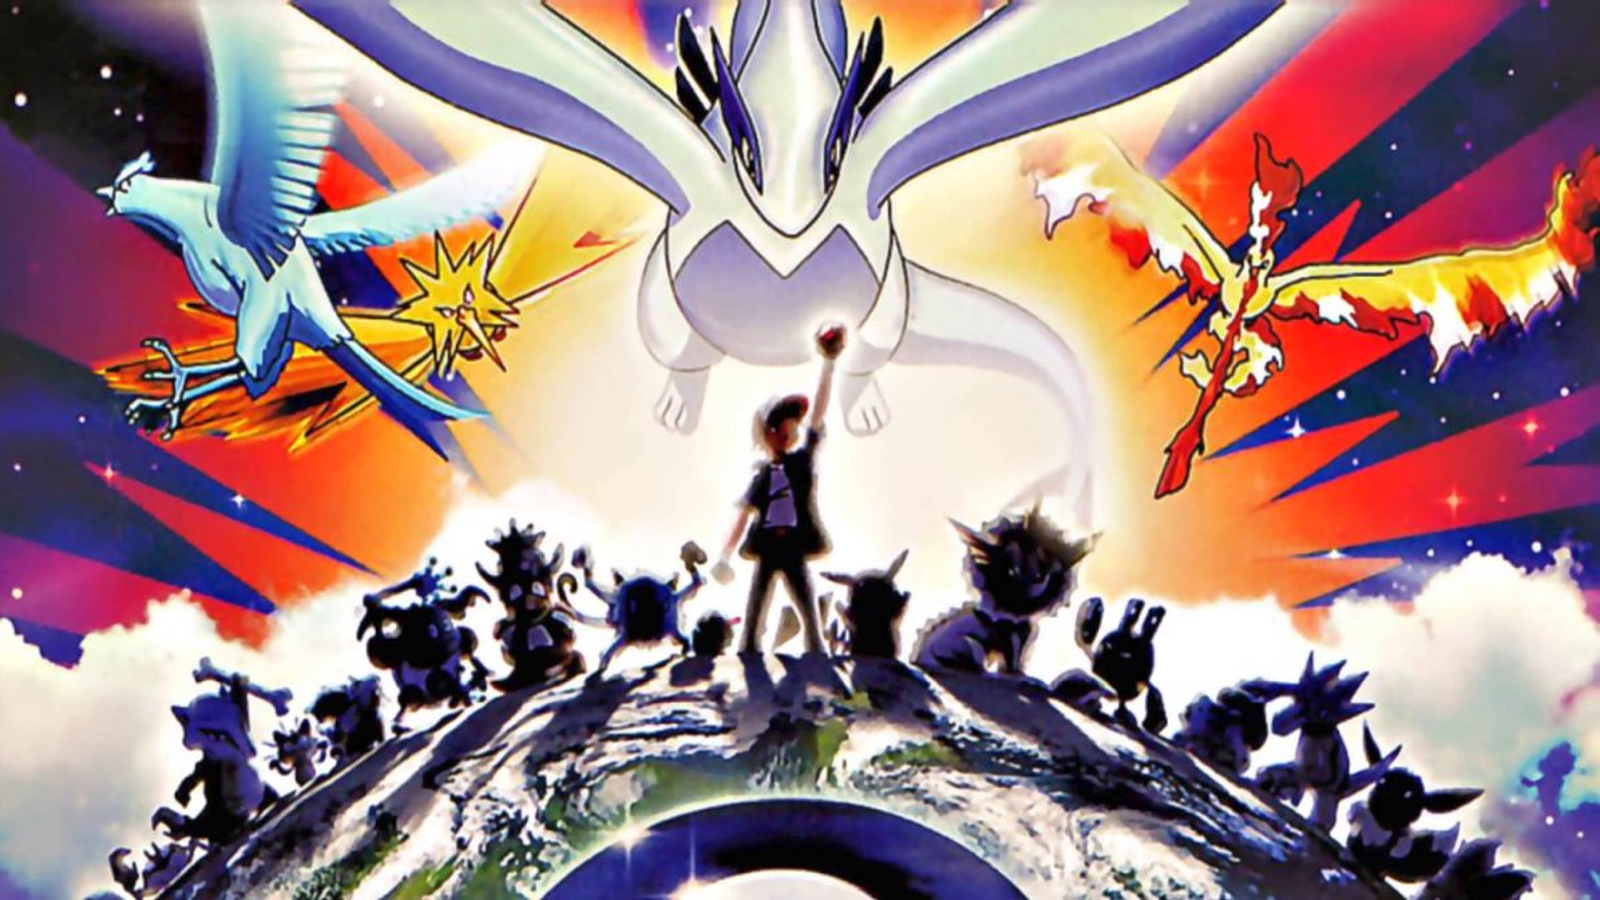 Challenge Lugia and Ho-Oh during a Special Raid Weekend! – Pokémon GO